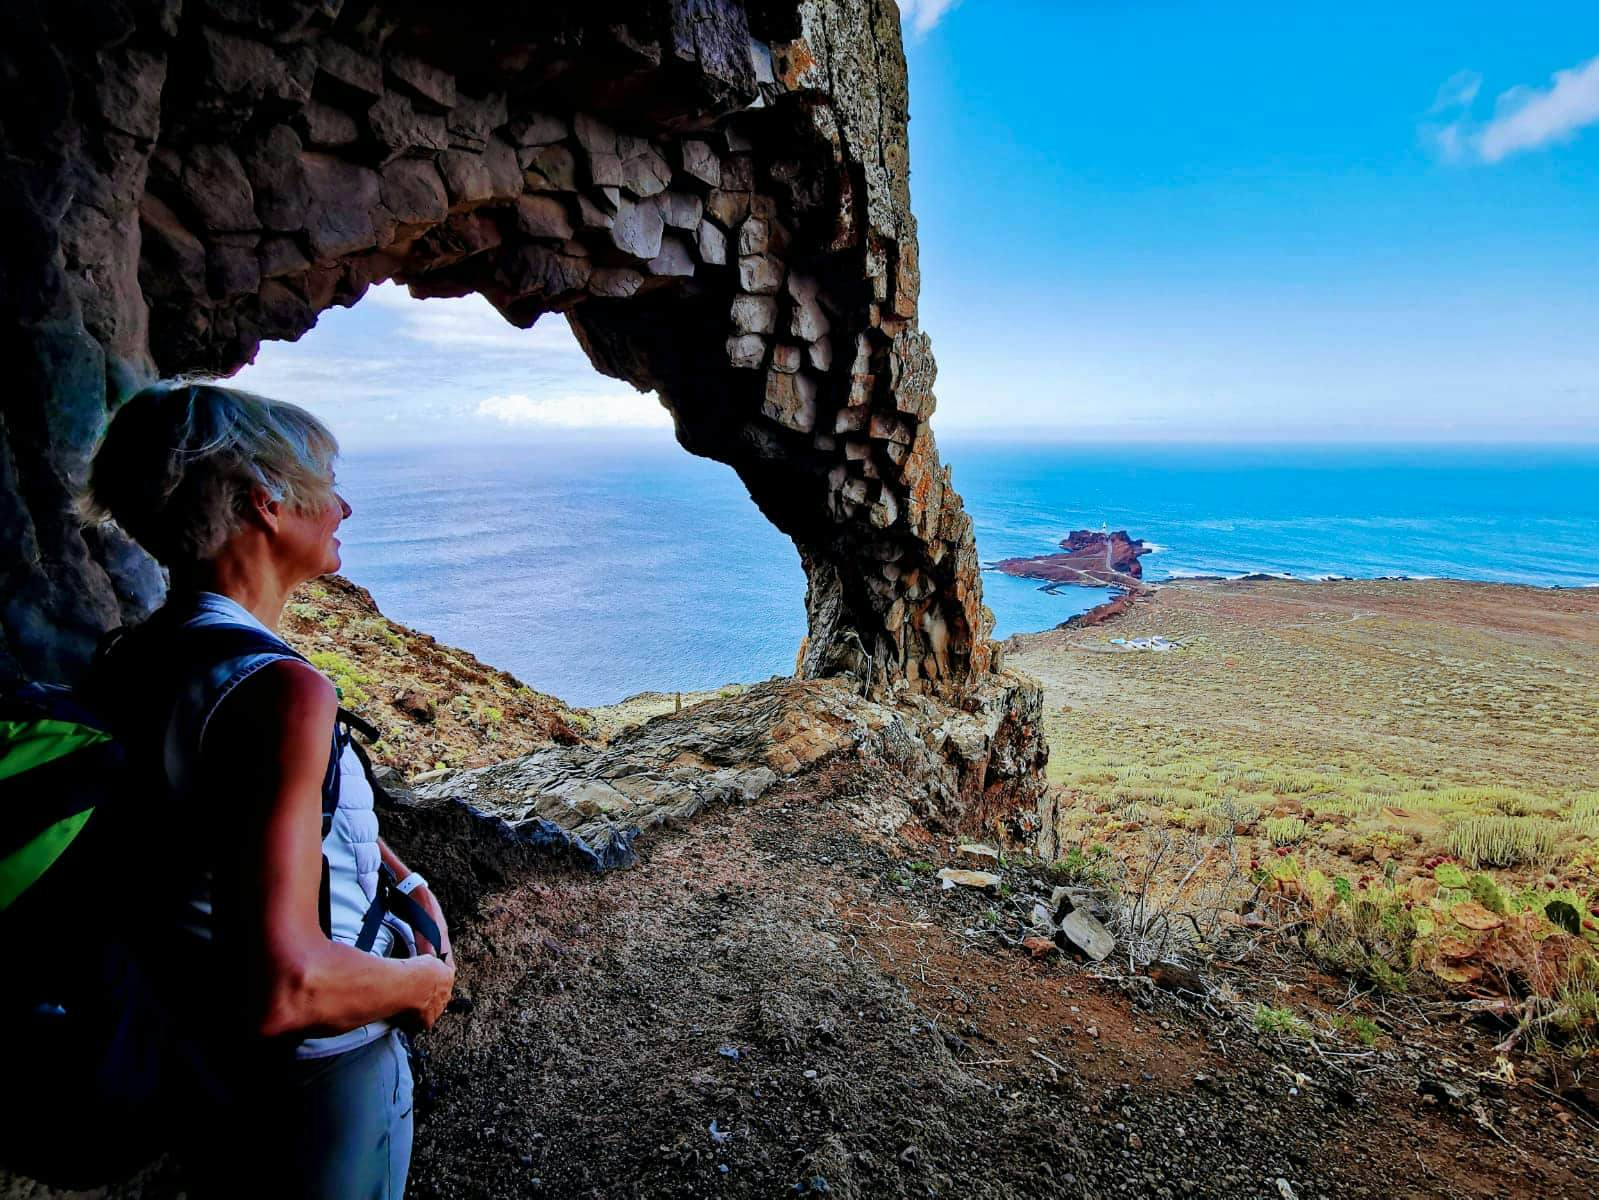 View from the rock gate to Punta Teno